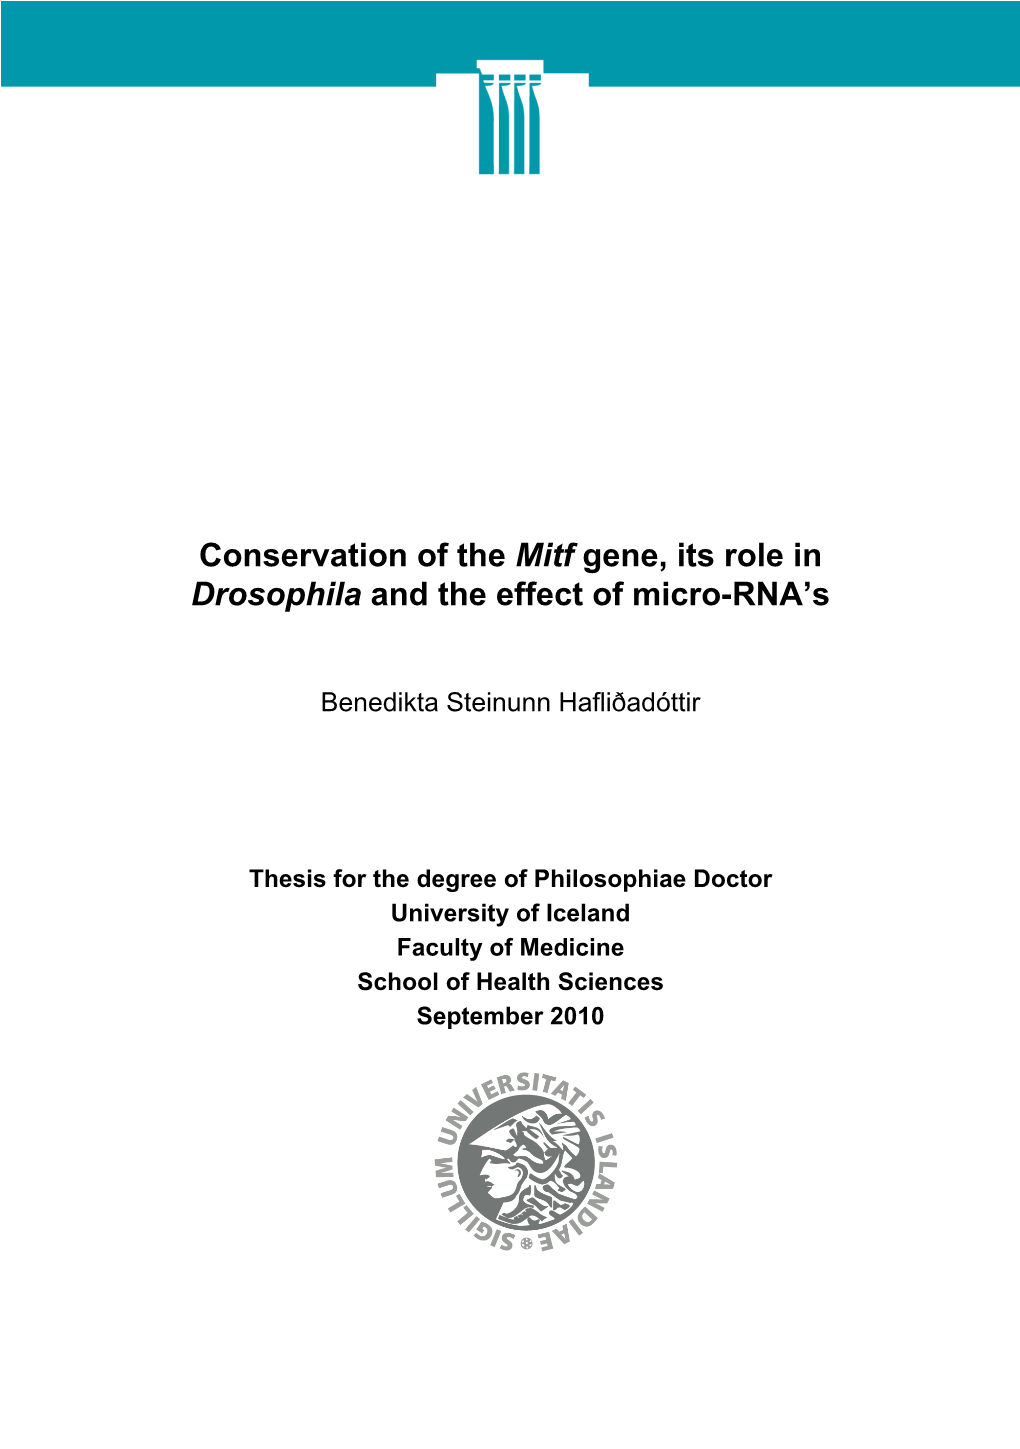 Conservation of the Mitf Gene, Its Role in Drosophila and the Effect of Micro-RNA’S